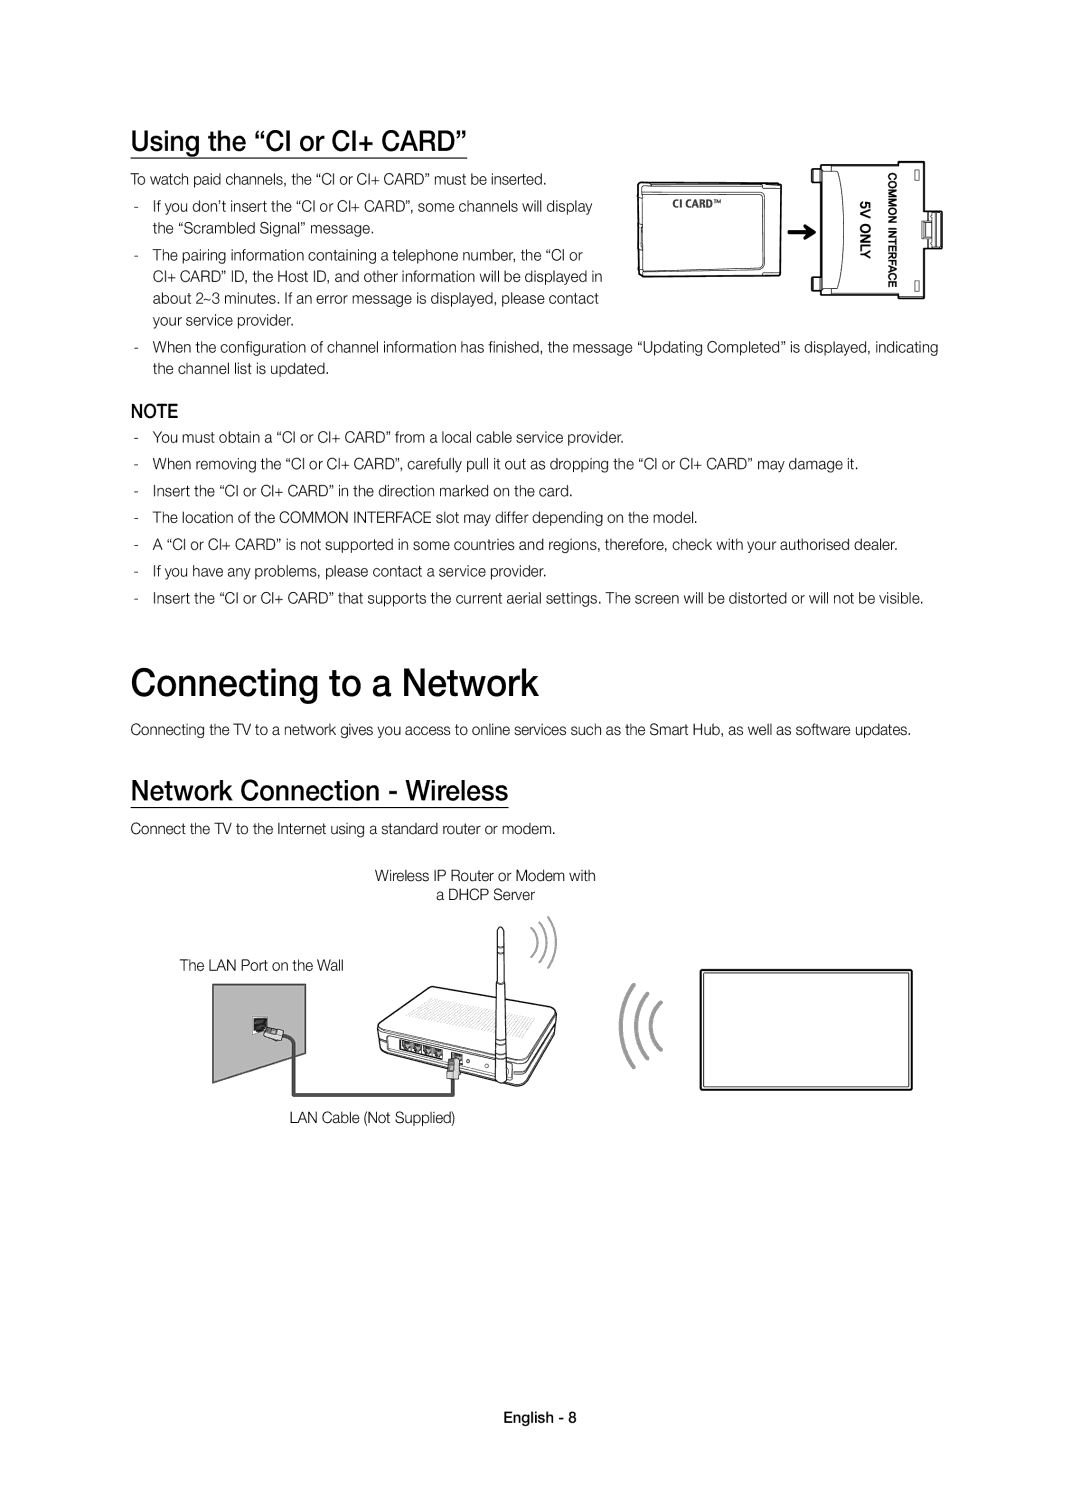 Samsung UE32H5570SSXZG, UE48H5510SSXZG manual Connecting to a Network, Using the CI or CI+ Card, Network Connection Wireless 